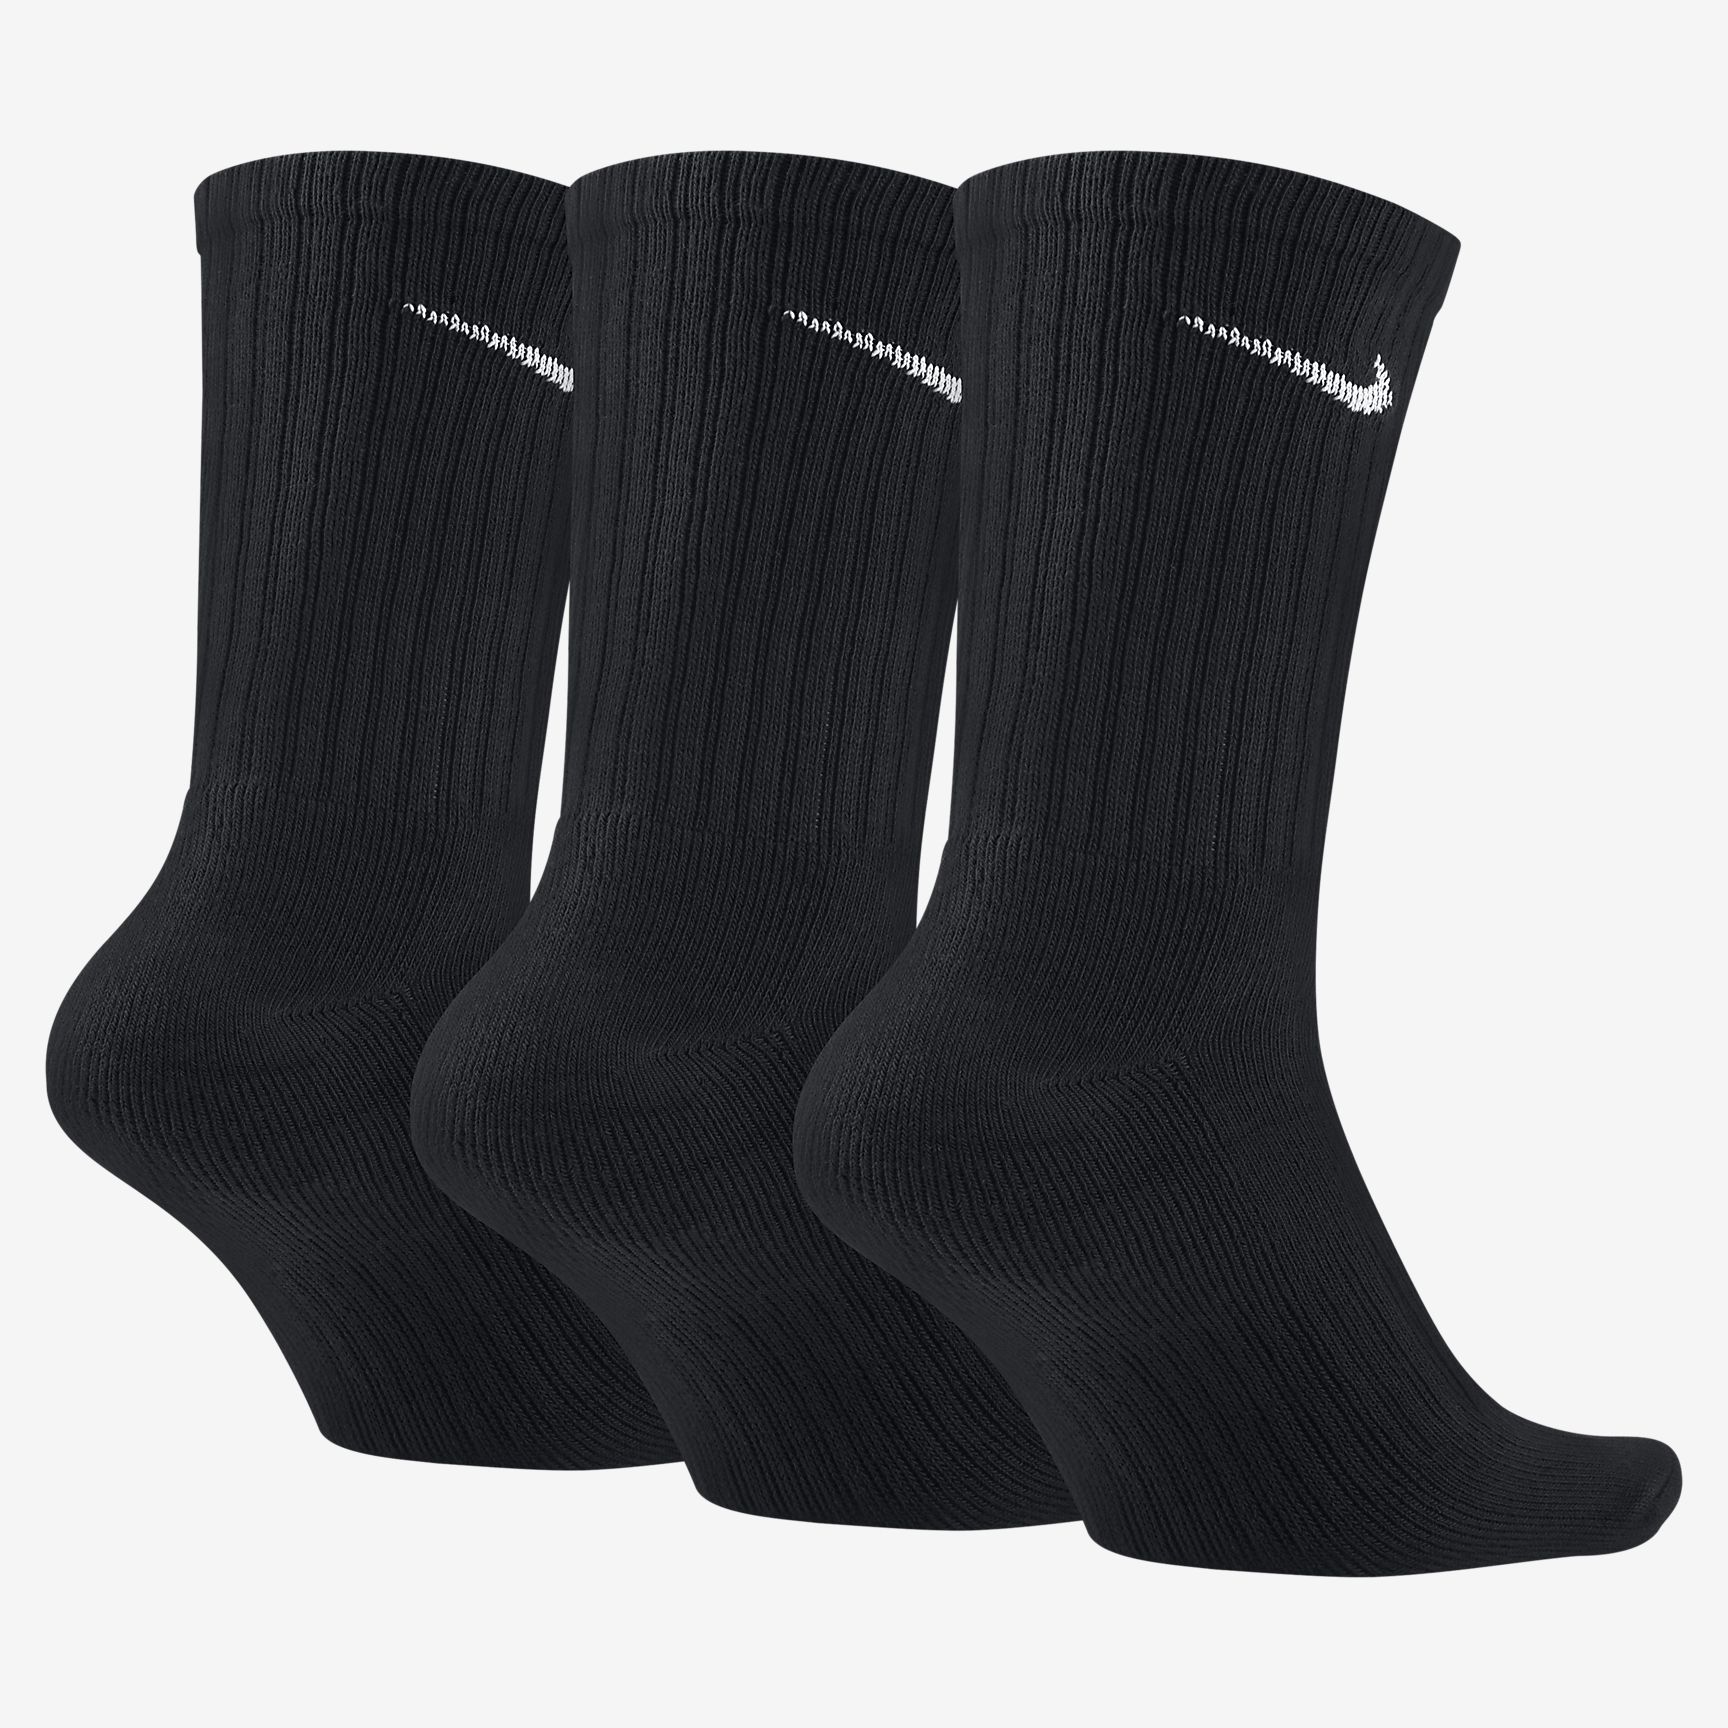 Nike Cushioned Chaussettes mi-mollet (3 paires), Chaussettes, Nike